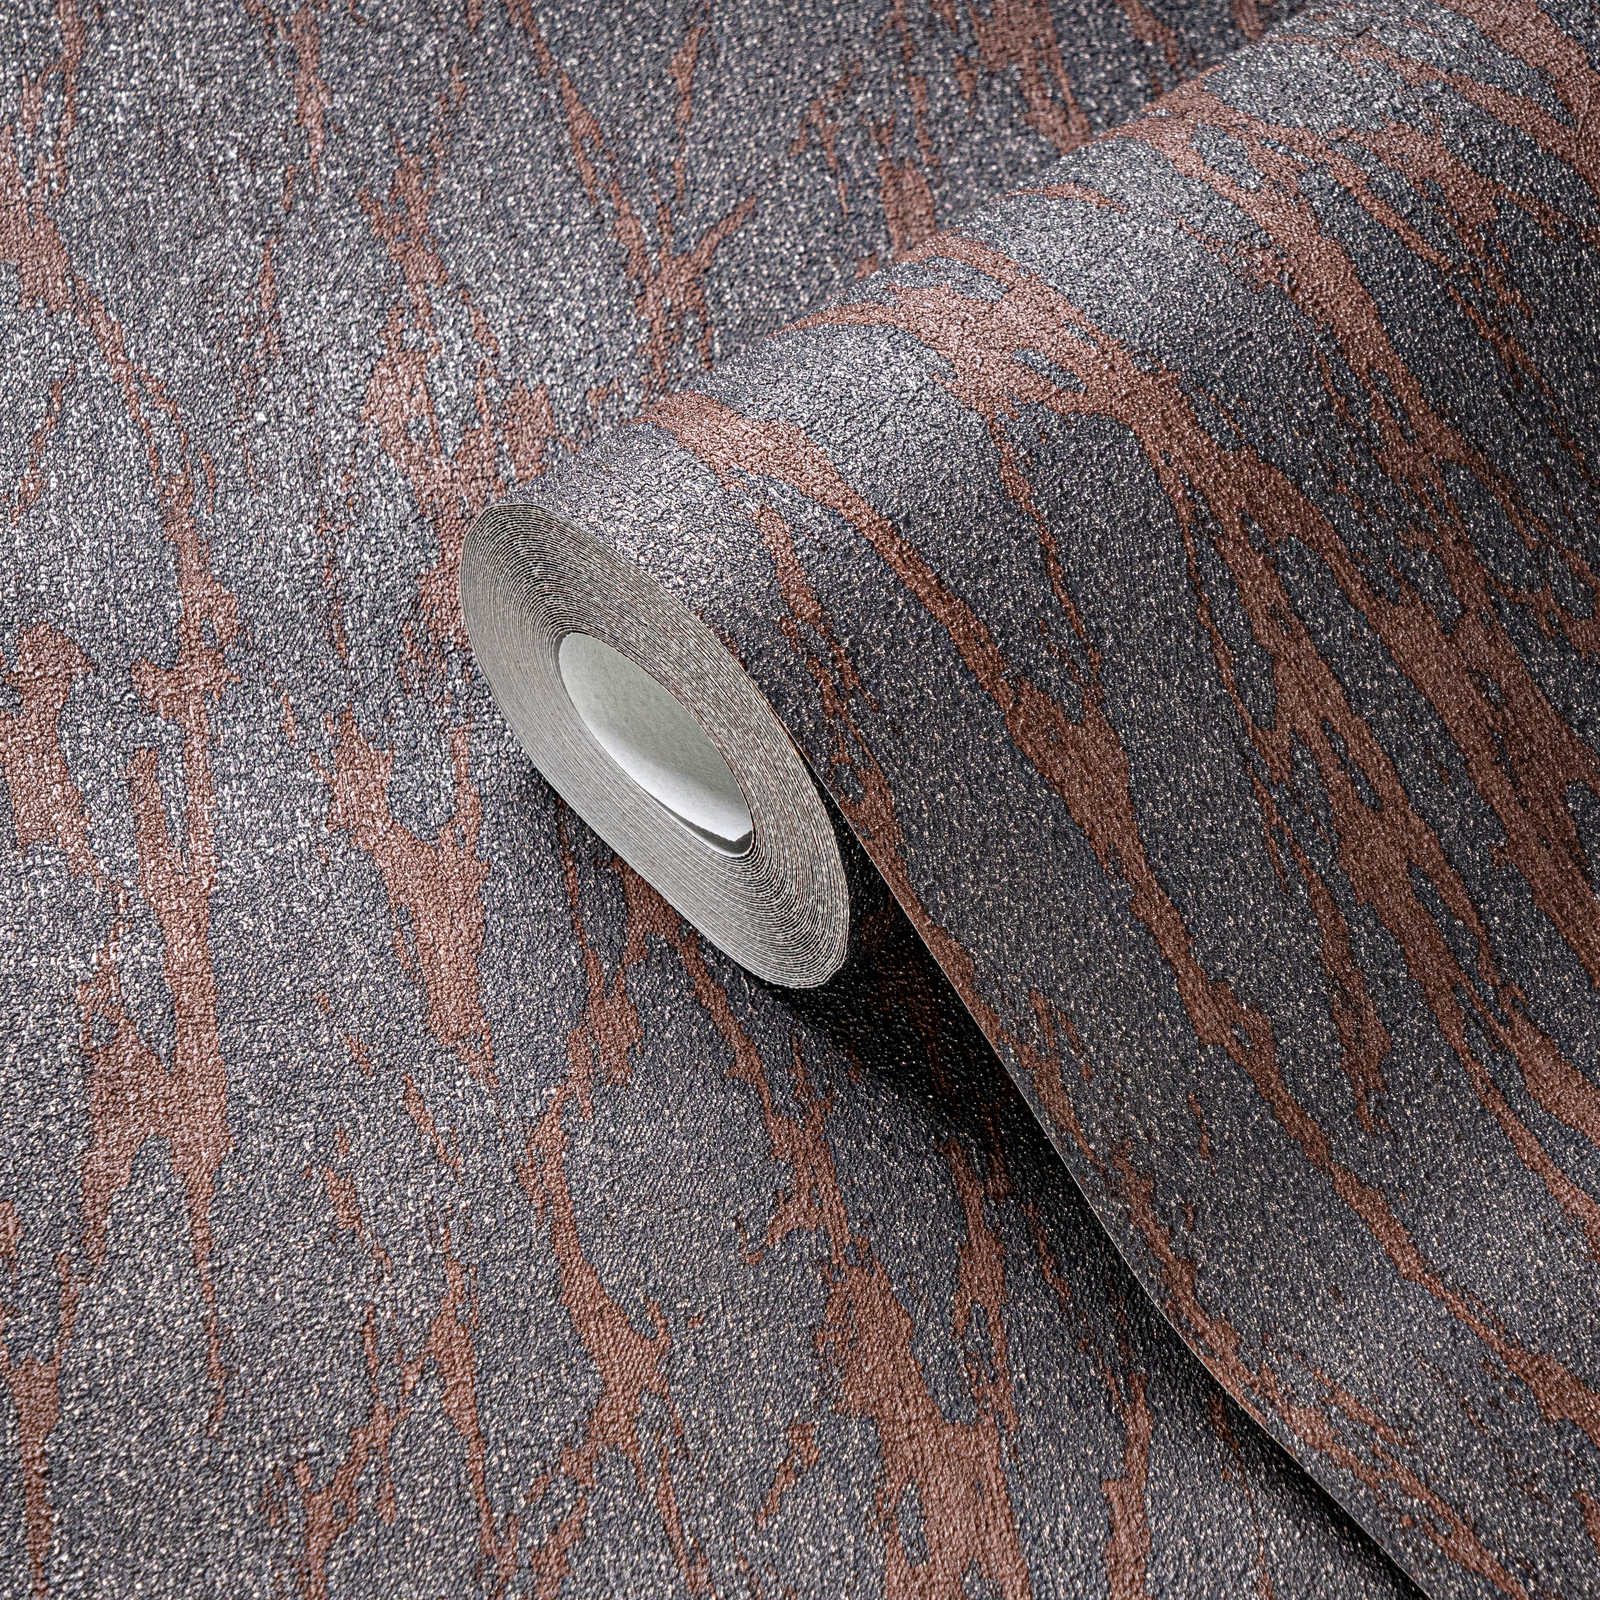             Non-woven wallpaper in one colour with gold accents - blue, brown, silver
        